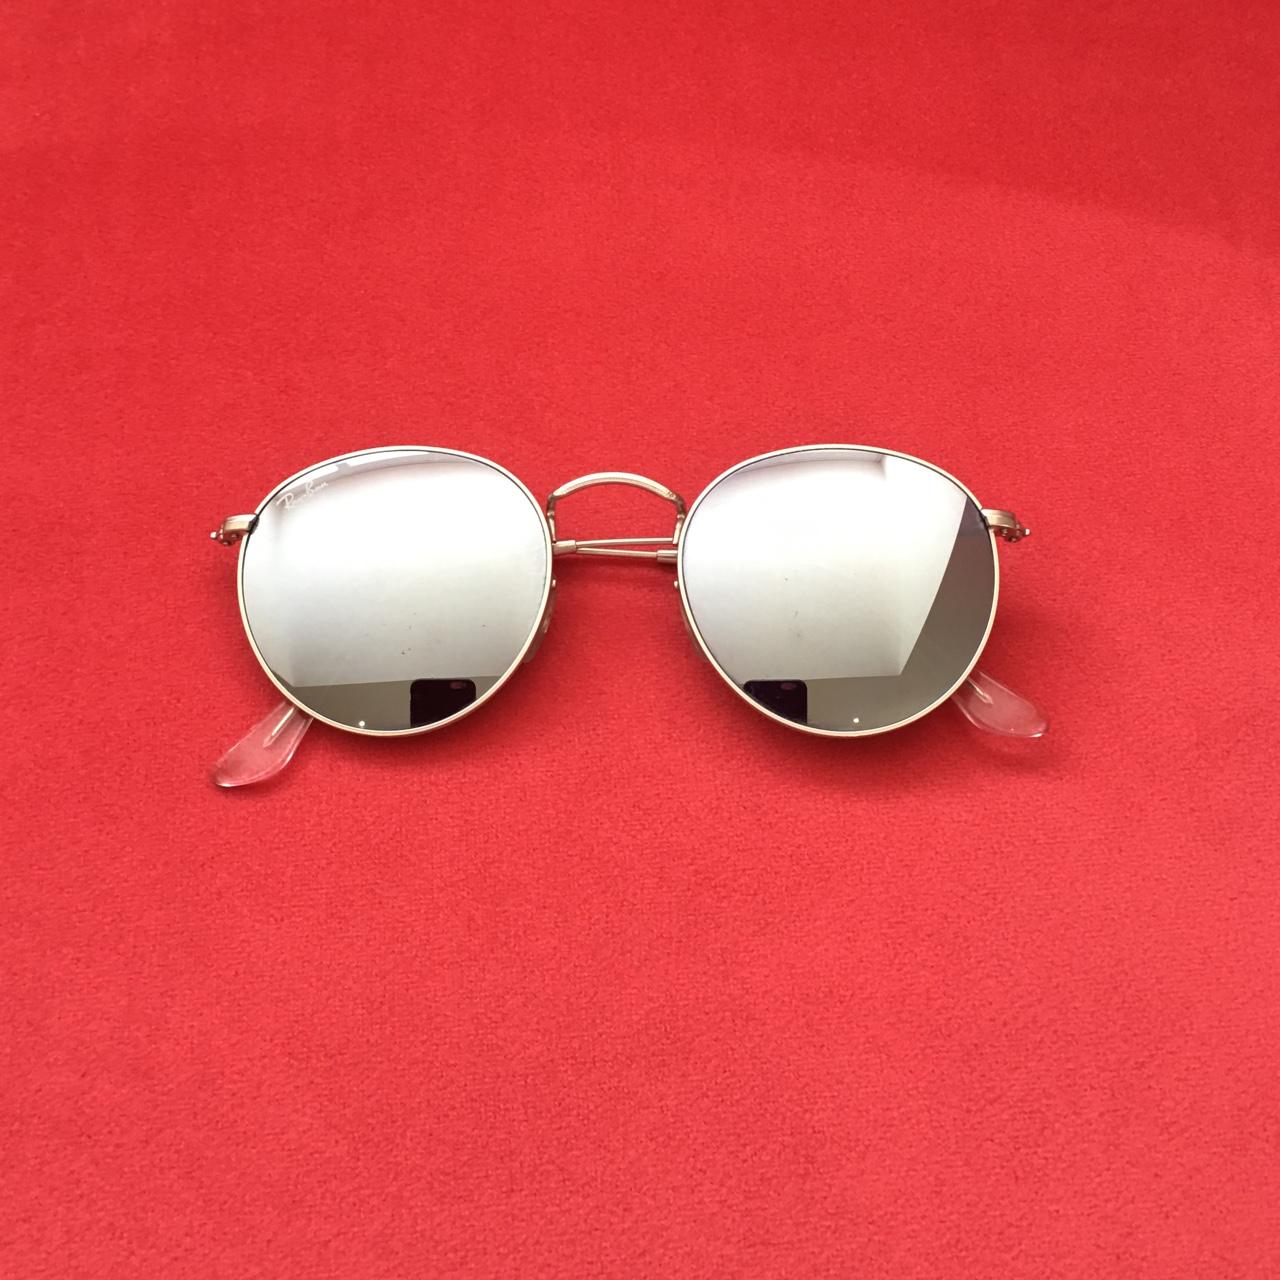 RAY BAN round silver/blue reflective sunglasses. - Depop